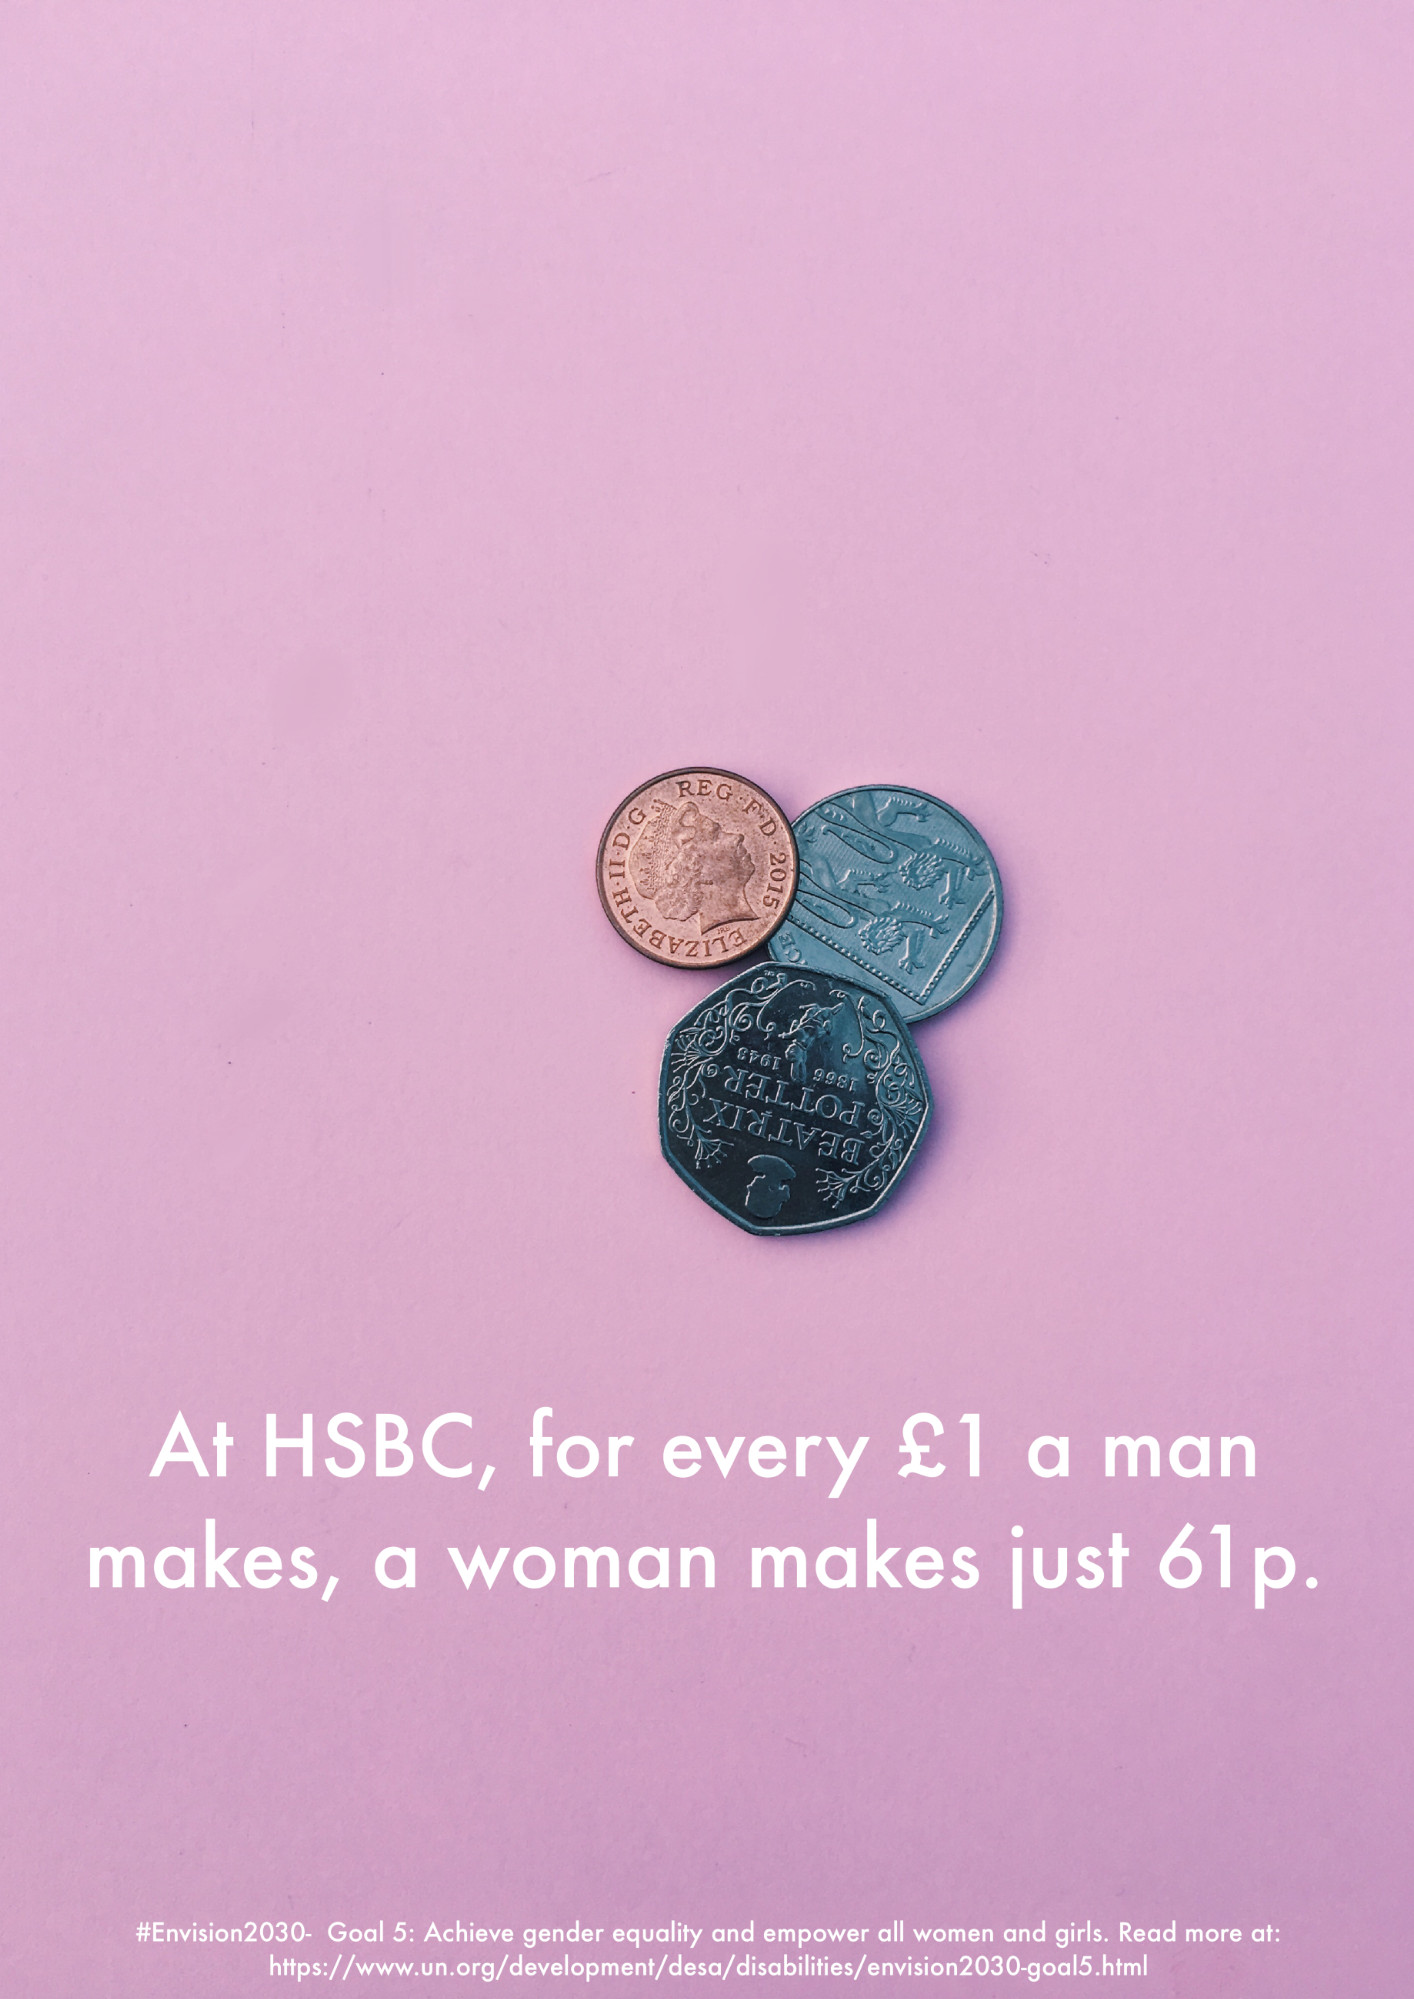 Poster based on the gender pay gap figures of 2018